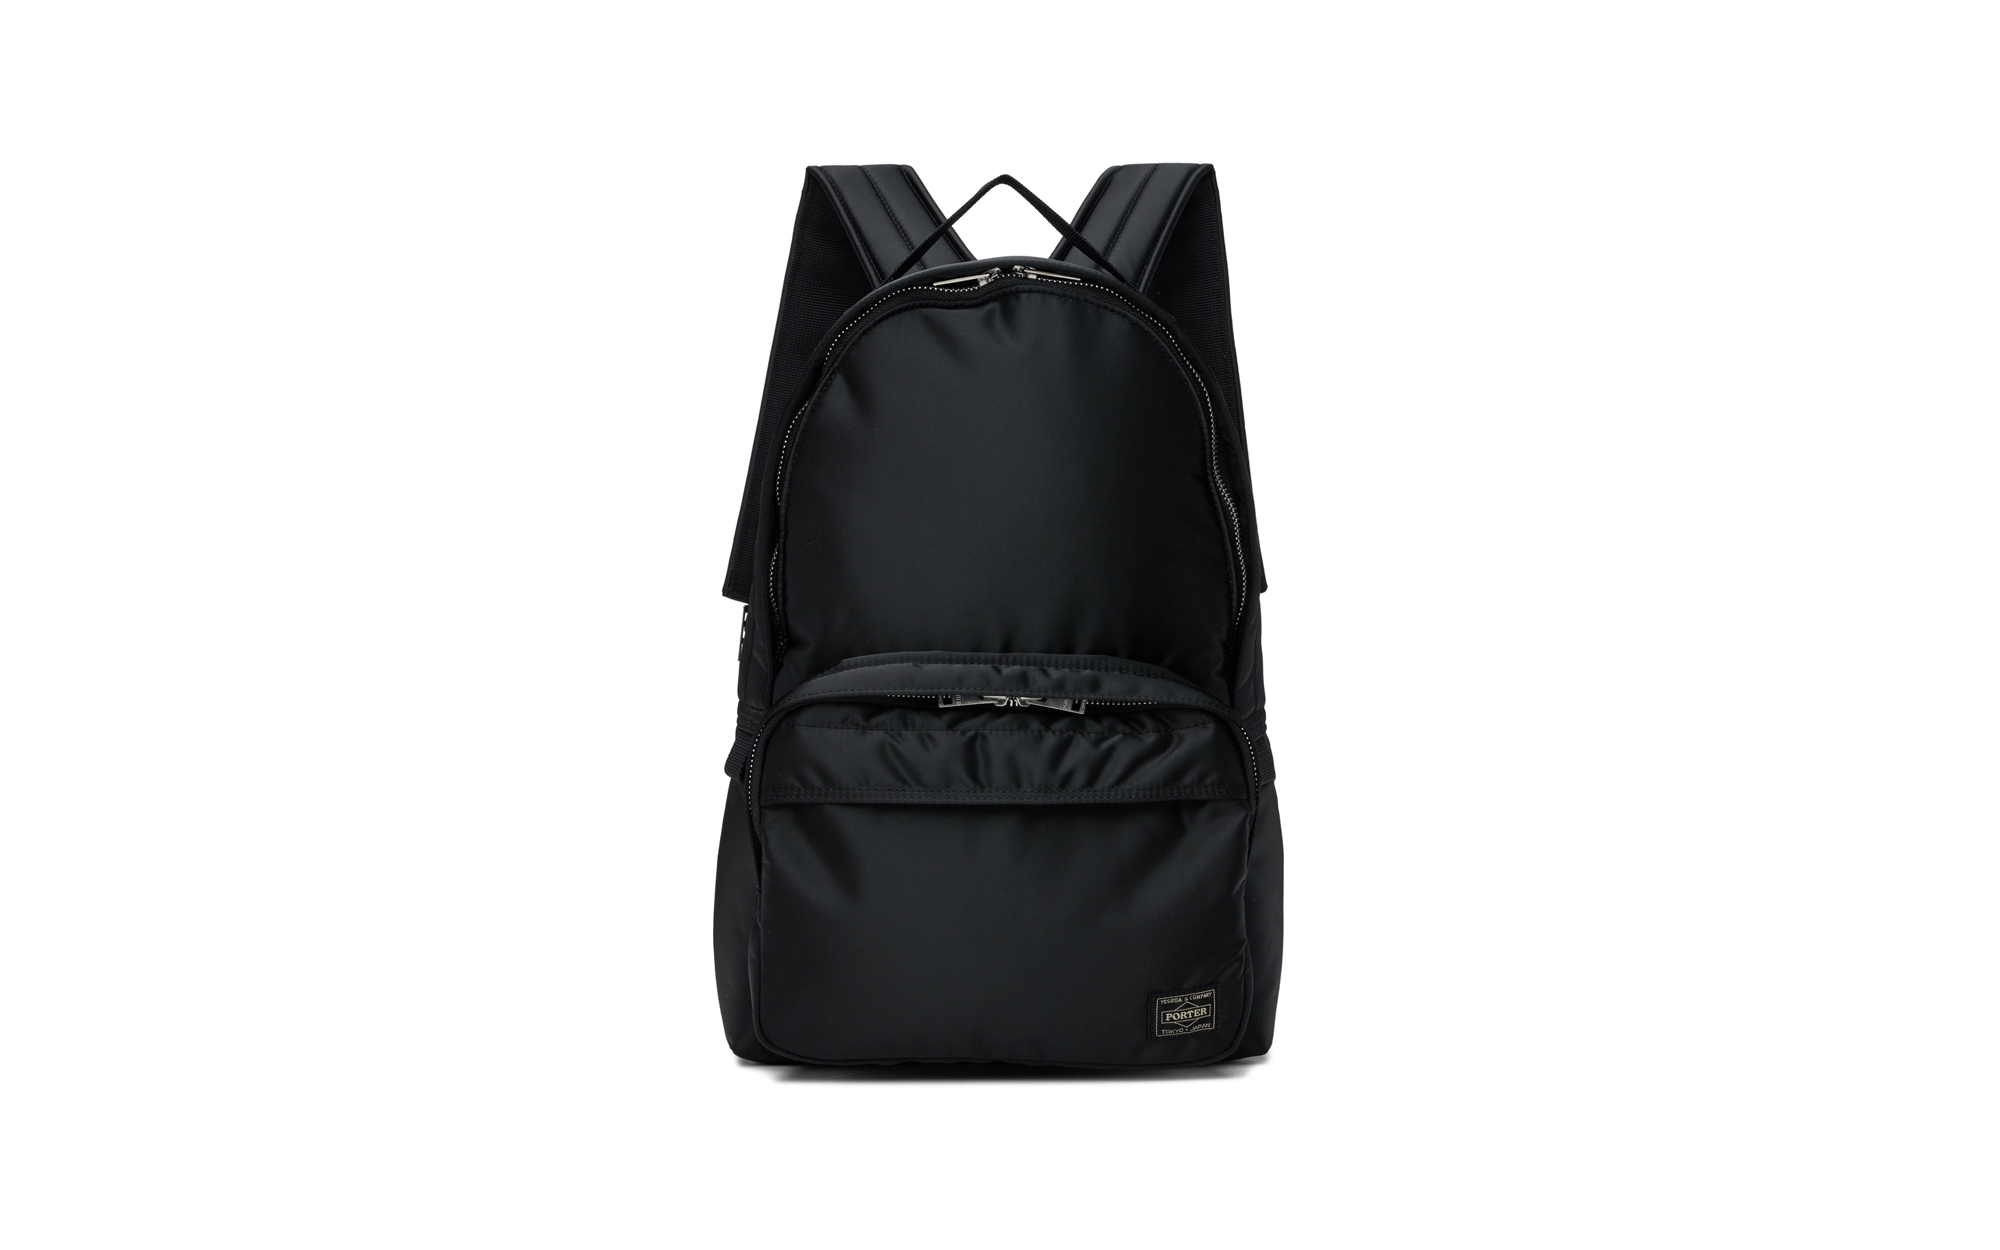 Minimalist Backpack Designs to Carry Essentials in Style - Gessato